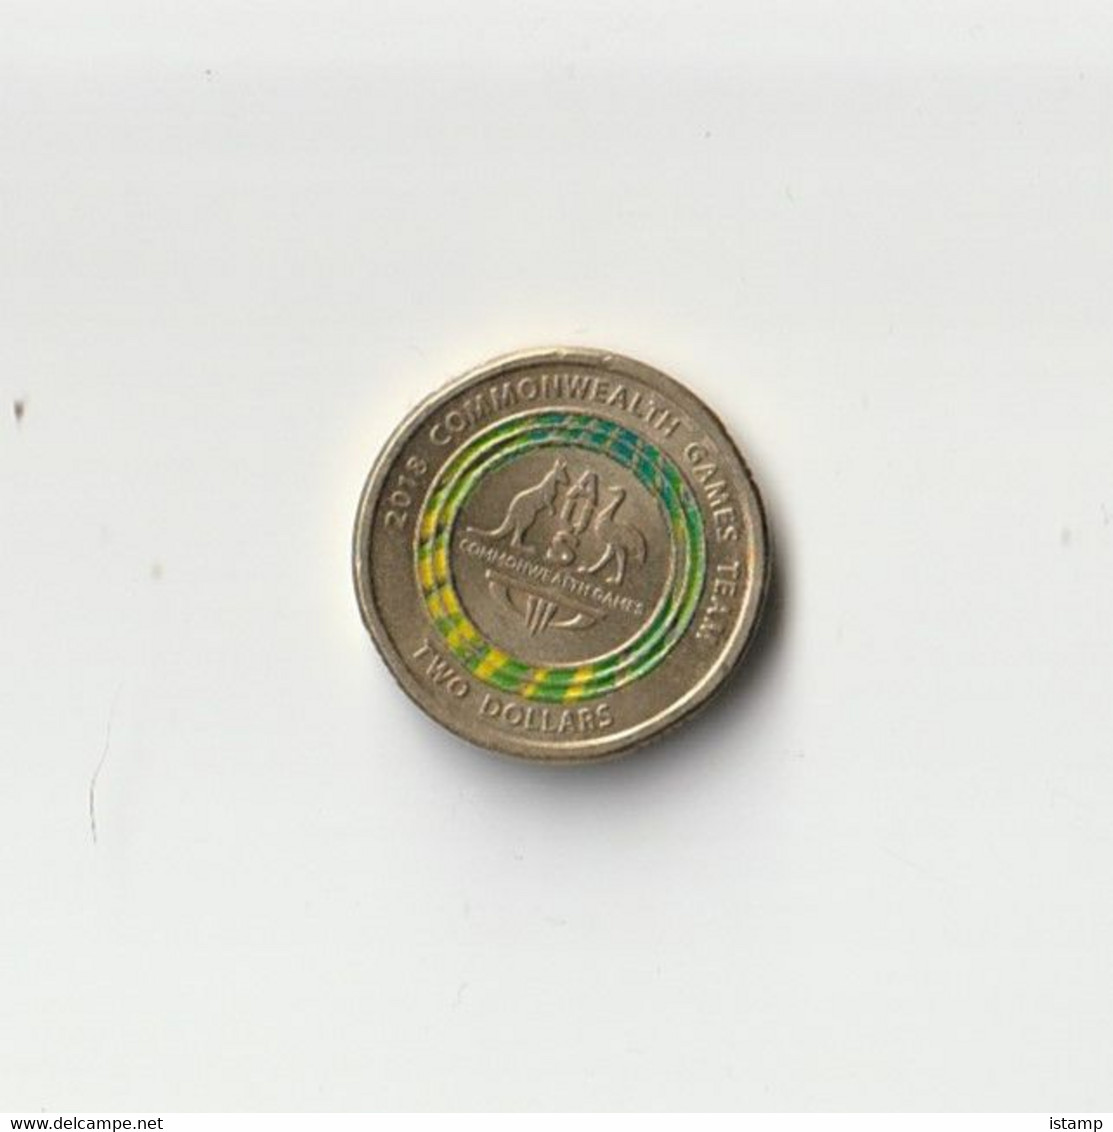 ⭐2018 - Australia Gold Coast COMMONWEALTH GAMES 'Team With Logo' - $2 Coin Circulated⭐ - 2 Dollars